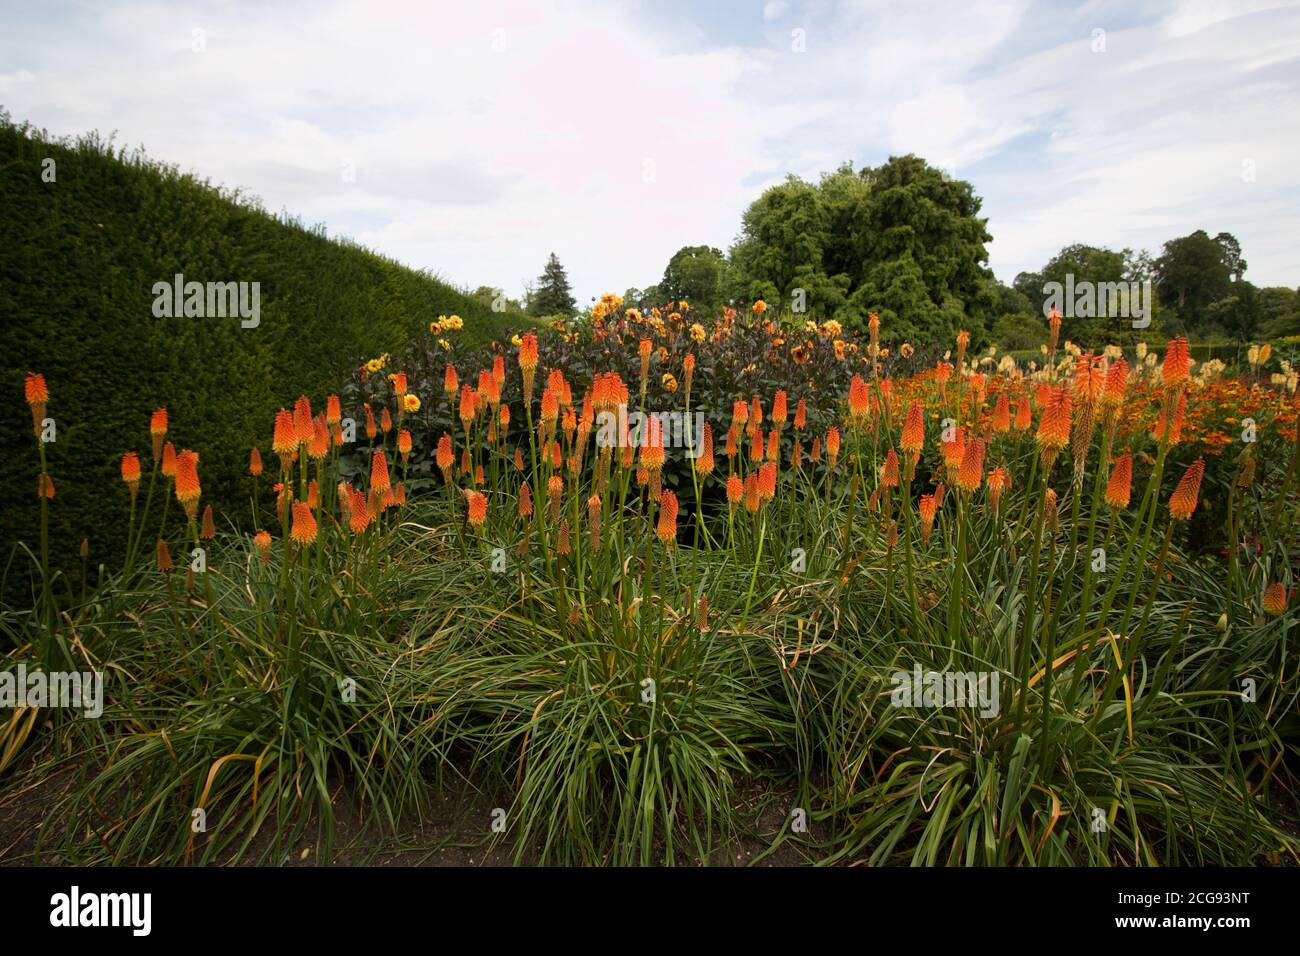 Lush display of red hot pokers in flowerbed with foliage Stock Photo